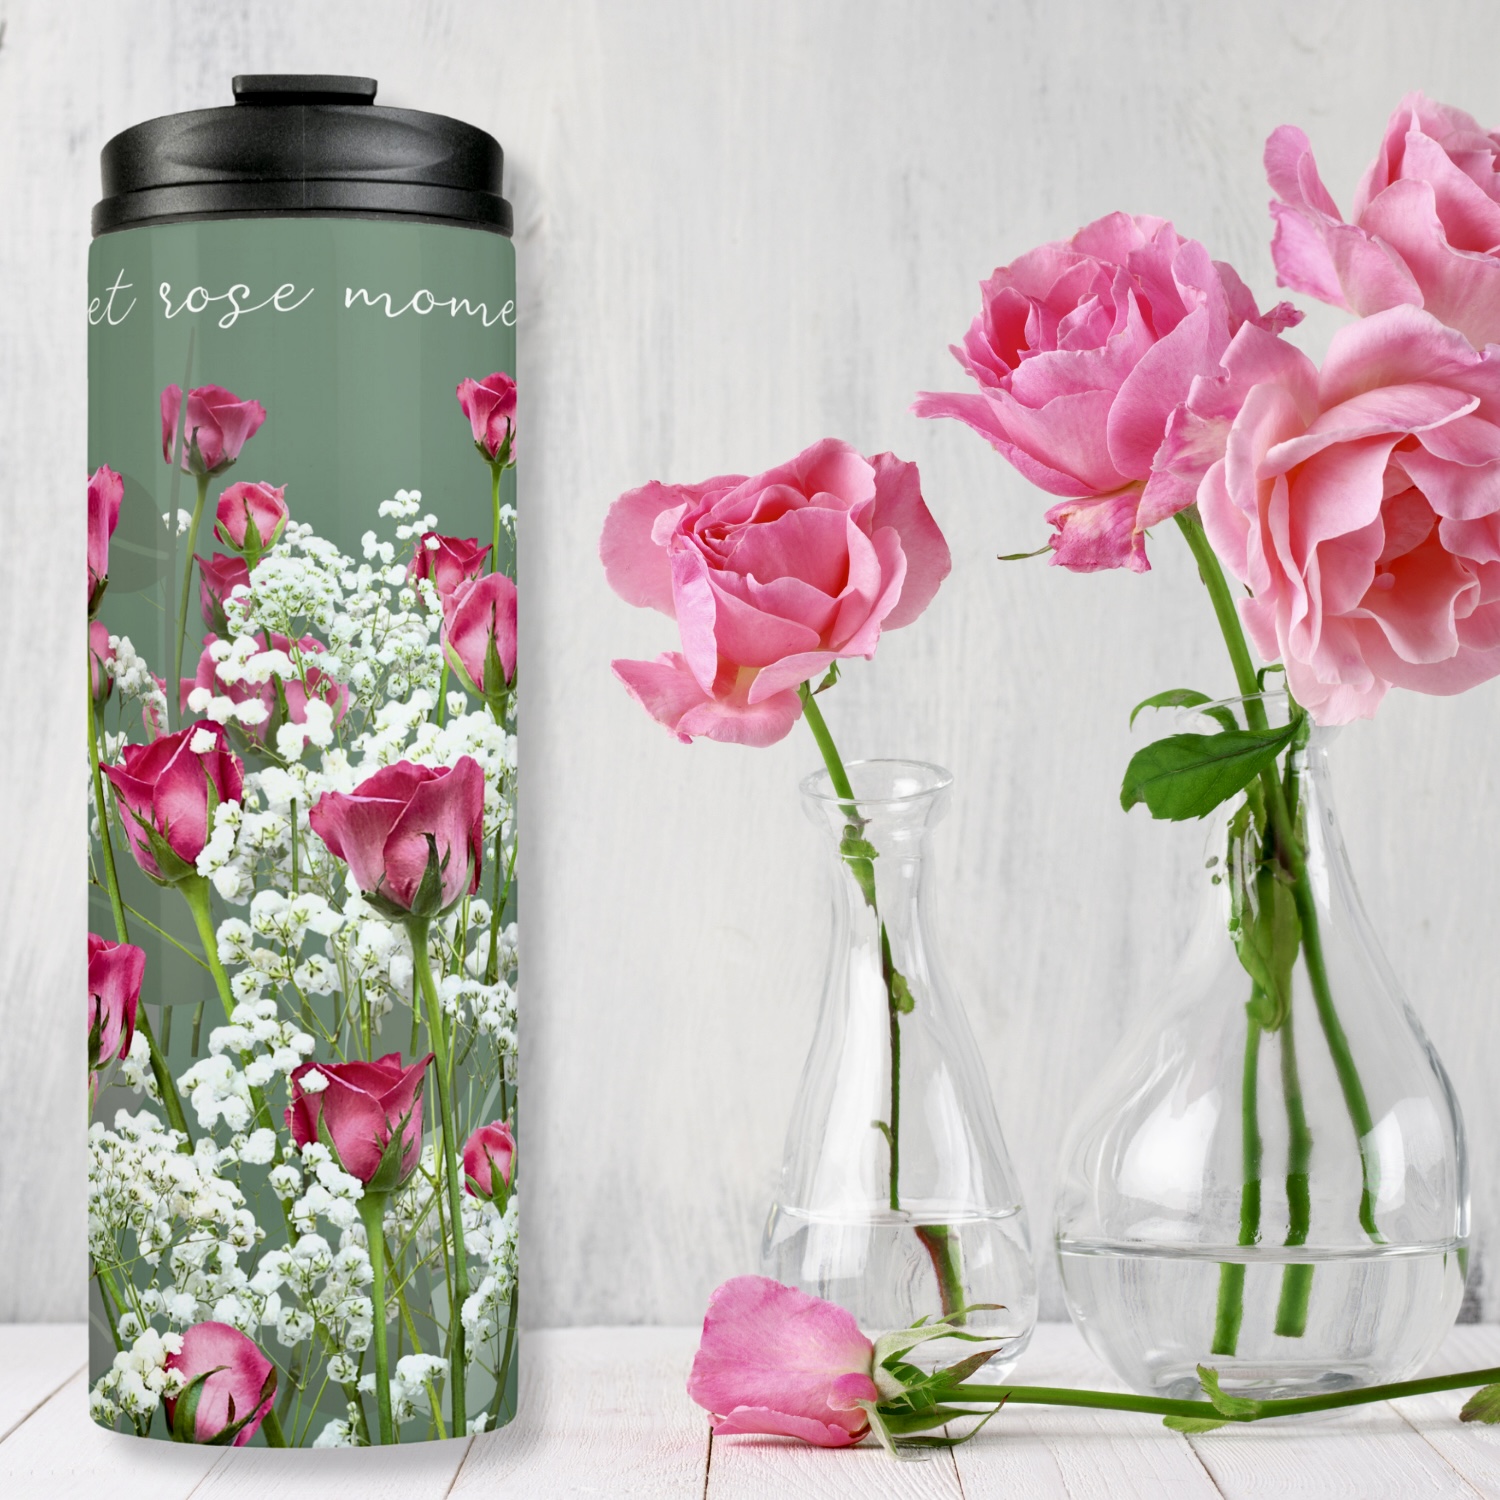 Soft green thermal tumbler with pink roses and white flowers, with inspirational quote “sweet roses moments”.